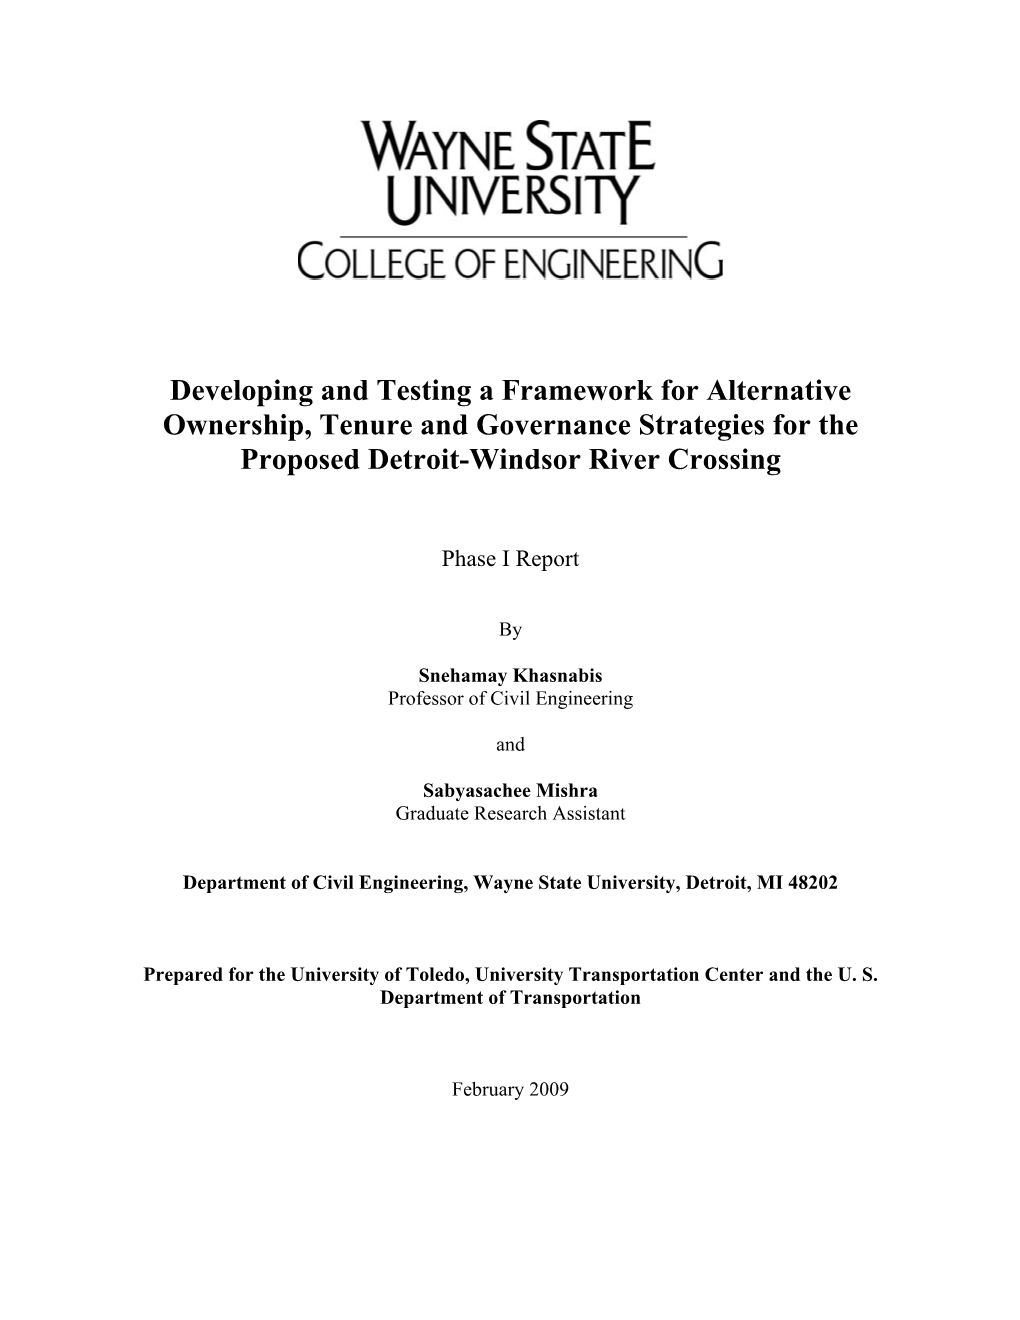 Developing and Testing a Framework for Alternative Ownership, Tenure and Governance Strategies for the Proposed Detroit-Windsor River Crossing